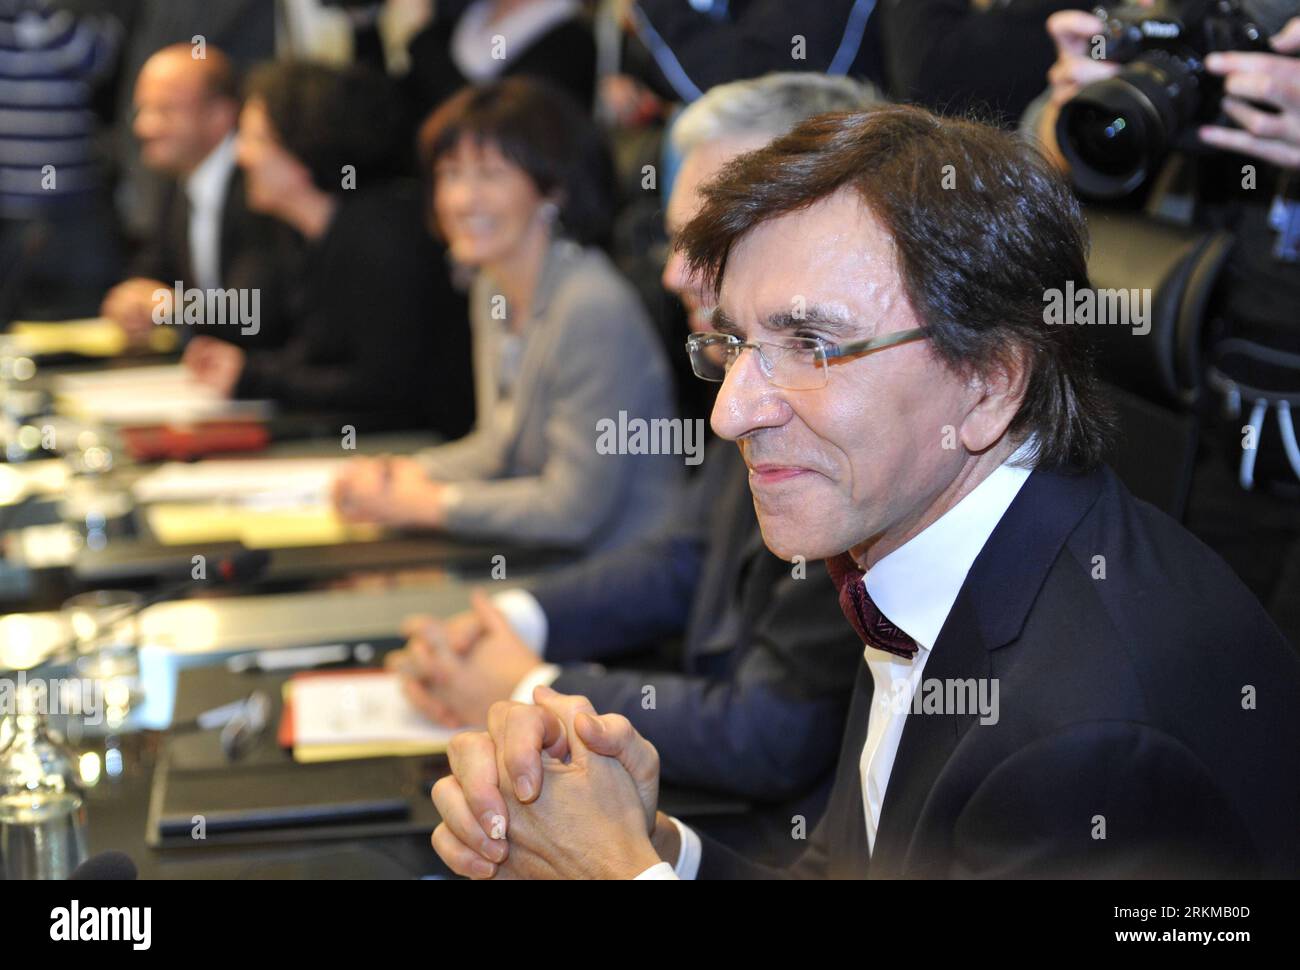 Bildnummer: 56651950  Datum: 06.12.2011  Copyright: imago/Xinhua (111206) -- BRUSSELS, Dec. 6, 2011 (Xinhua) -- Belgian new Prime Minister Elio Di Rupo attends the first cabinet meeting in Brussels, capital of Belgium, Dec. 6, 2011. The inauguration of the new government marked the ending of a record 18-months long political deadlock of Belgium. (Xinhua/Ye Pingfan) (ypf) BELGIUM-BRUSSELS-NEW GOVERNMENT PUBLICATIONxNOTxINxCHN People Politik neue Regierung Belgien x0x xtm 2011 quer premiumd      56651950 Date 06 12 2011 Copyright Imago XINHUA  Brussels DEC 6 2011 XINHUA Belgian New Prime Ministe Stock Photo